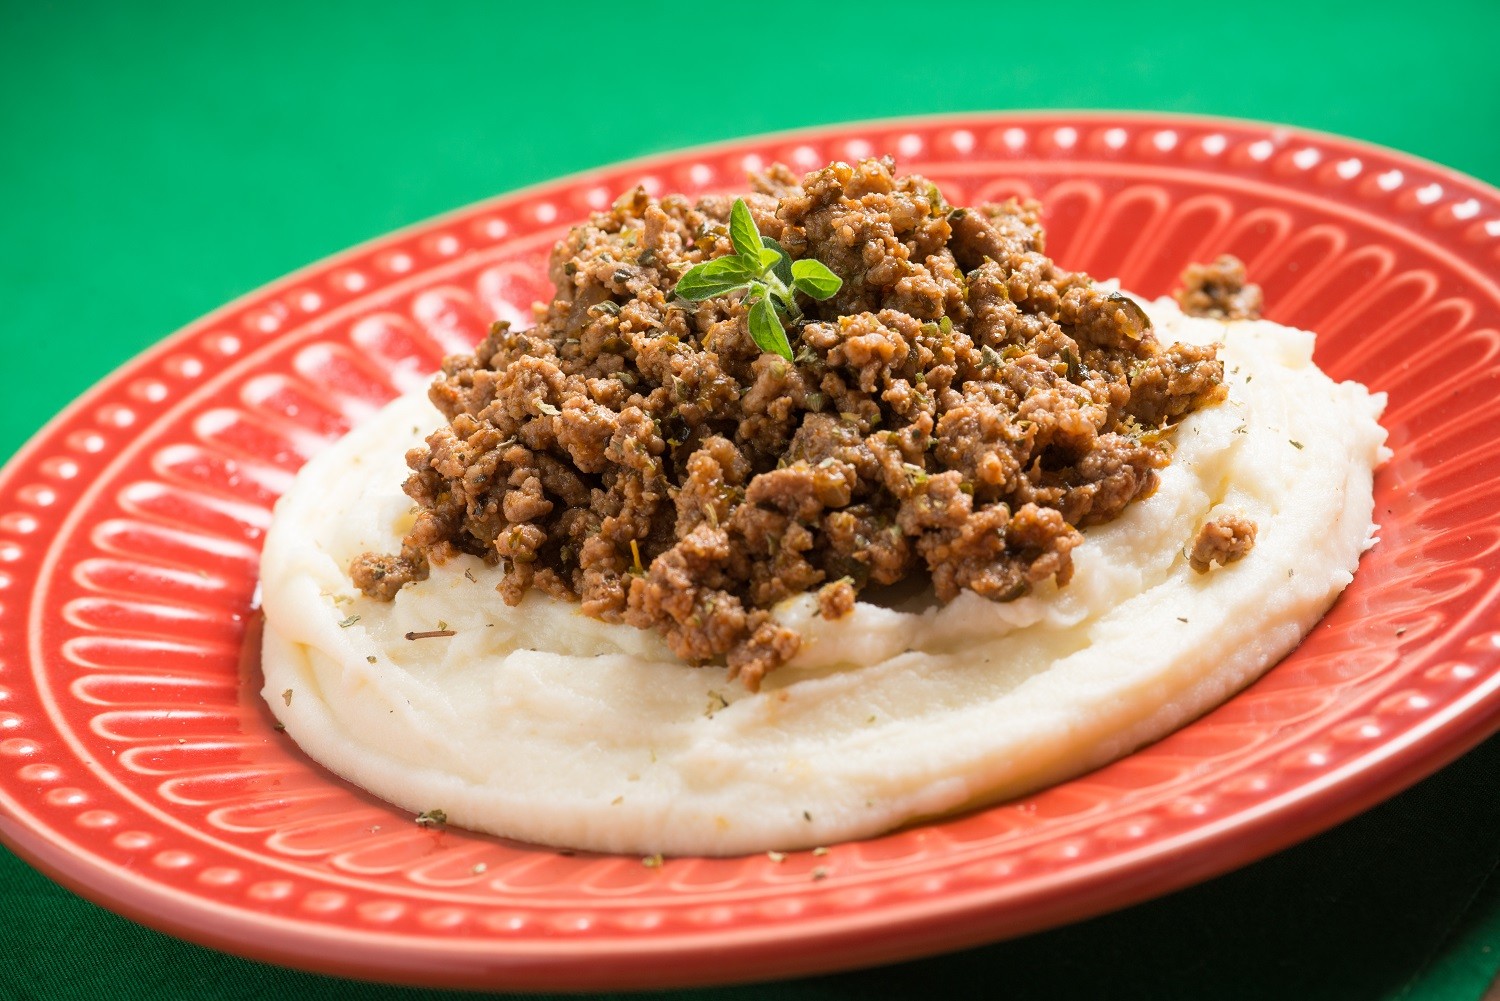 Recipe for braised ground beef with sweet paprika and oregano (Photo: Kitano / Disclosure)